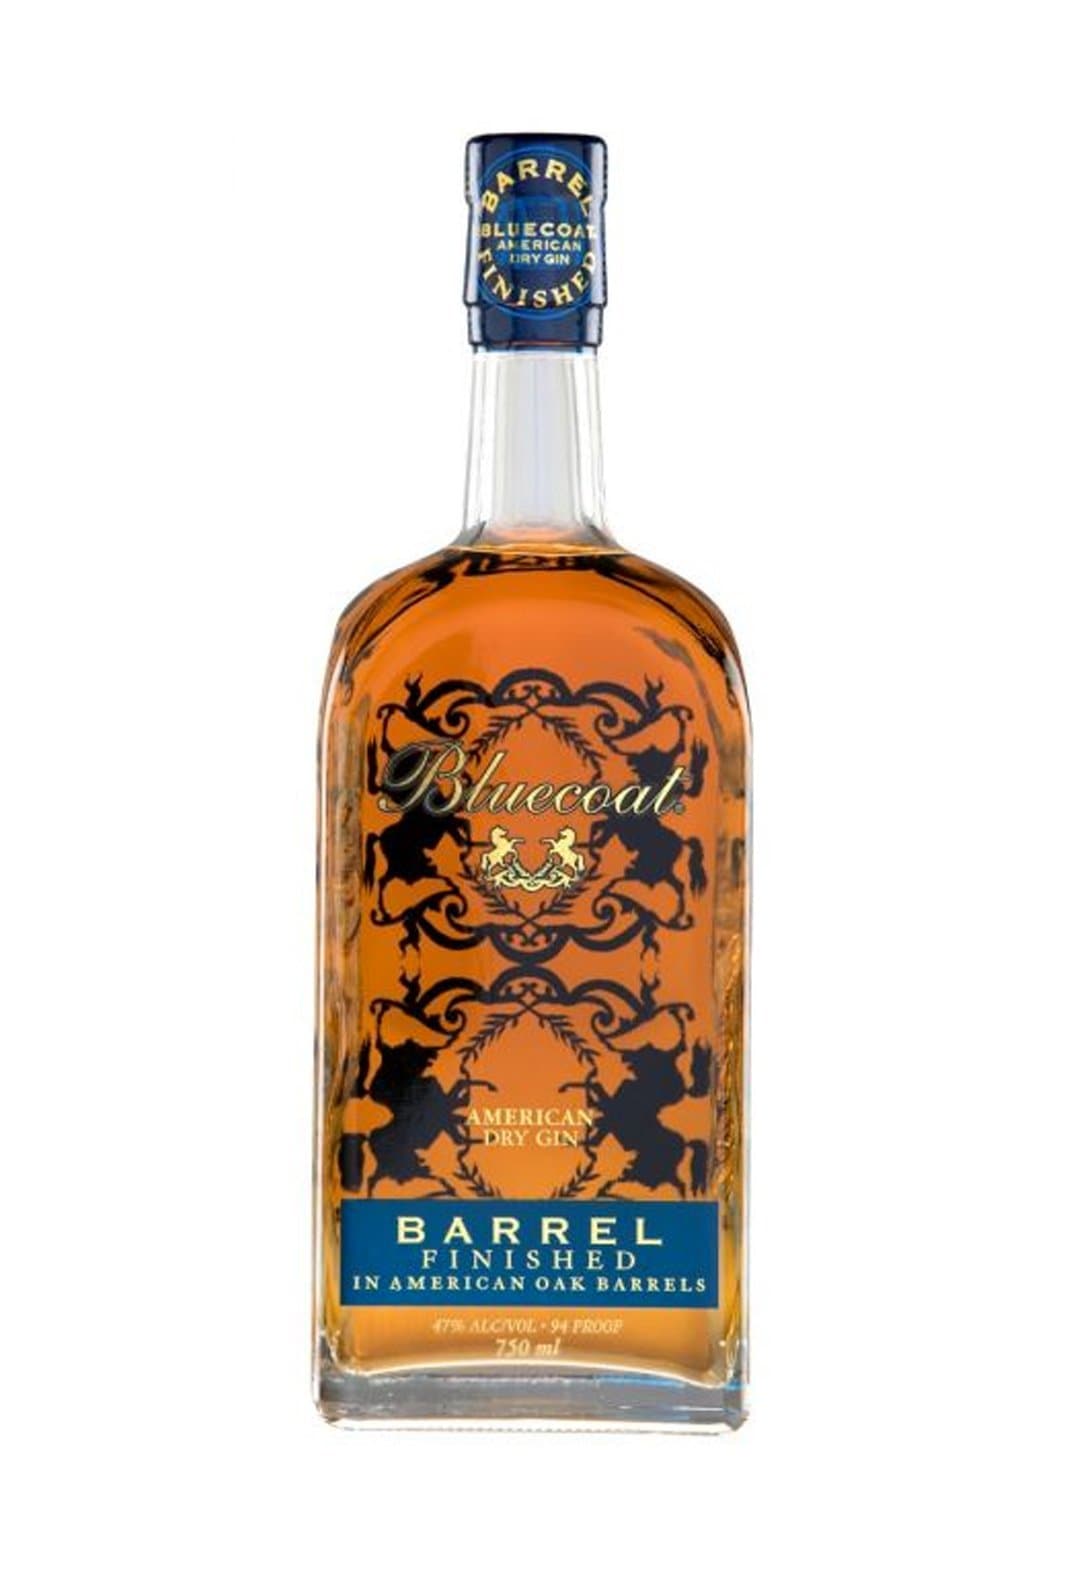 Bluecoat American Barrel Finished Gin 47% 750ml | Gin | Shop online at Spirits of France